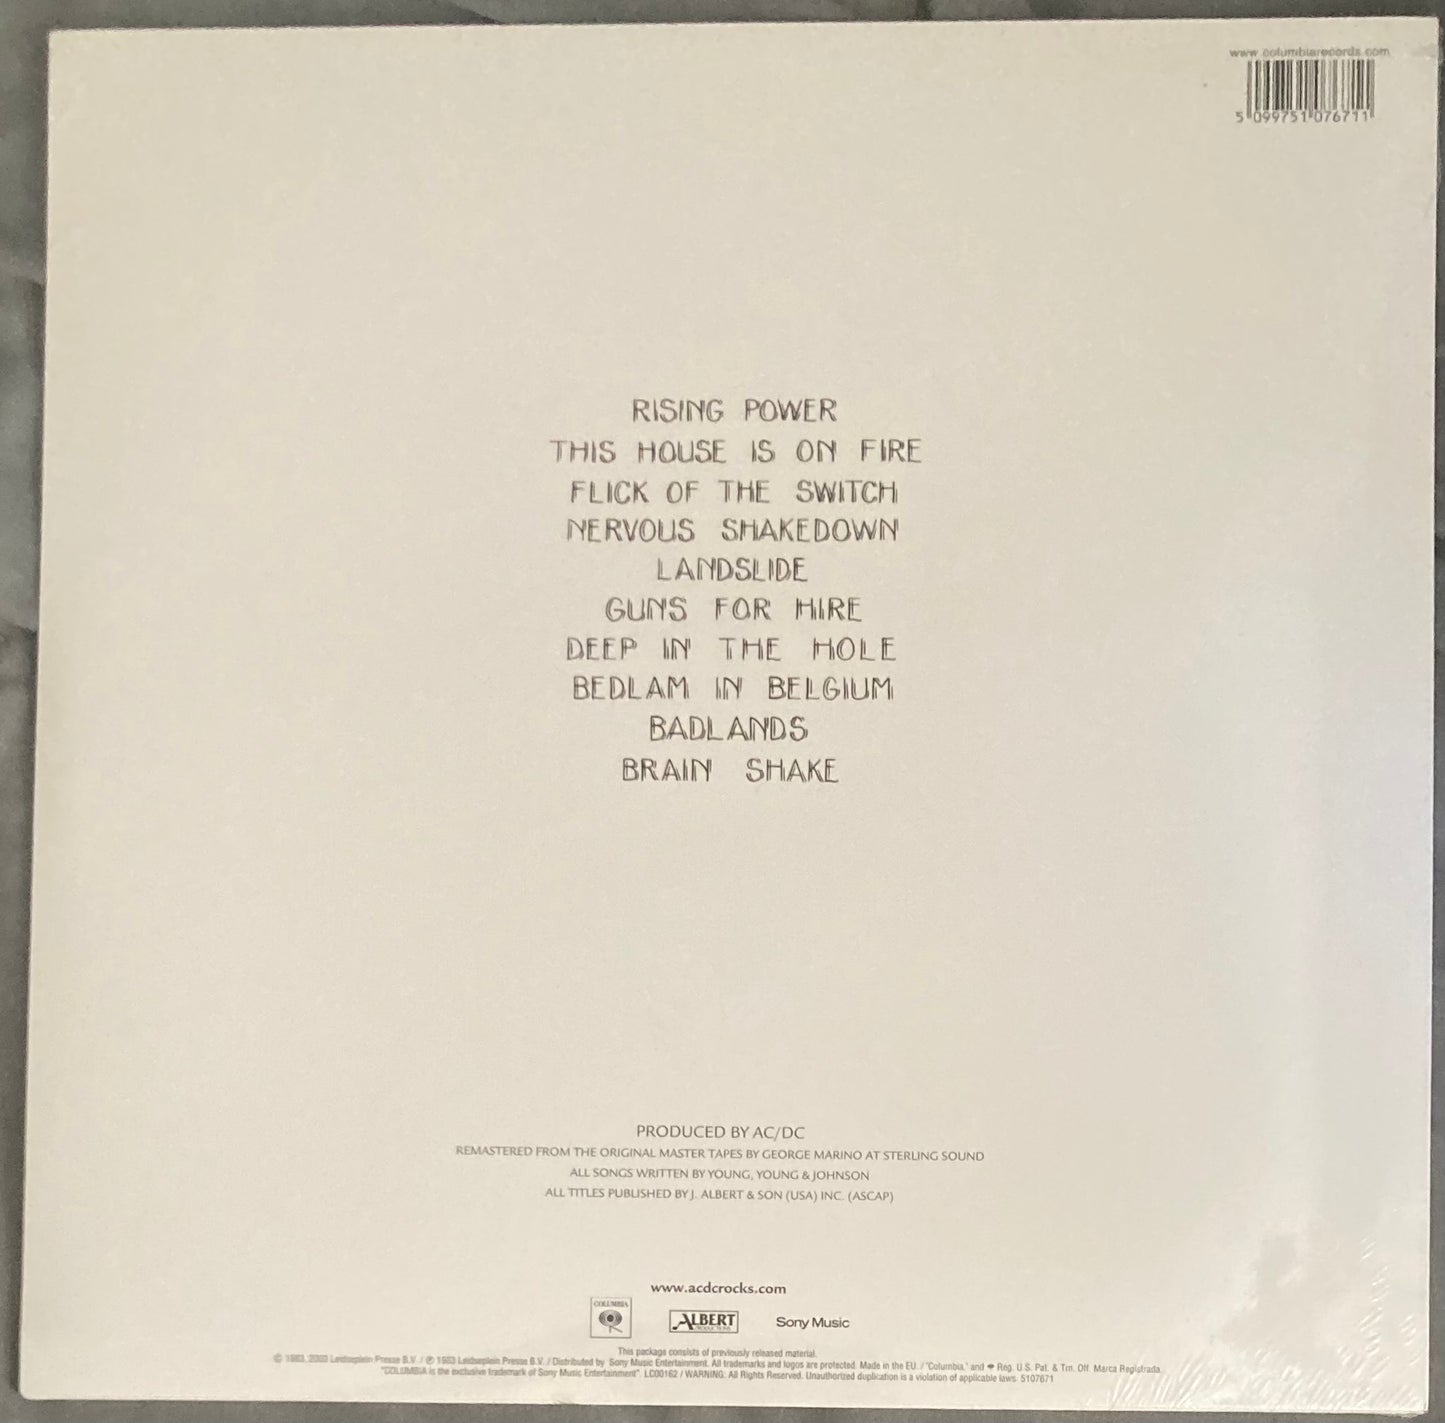 The back of 'AC/DC - Flick of the Switch' on vinyl